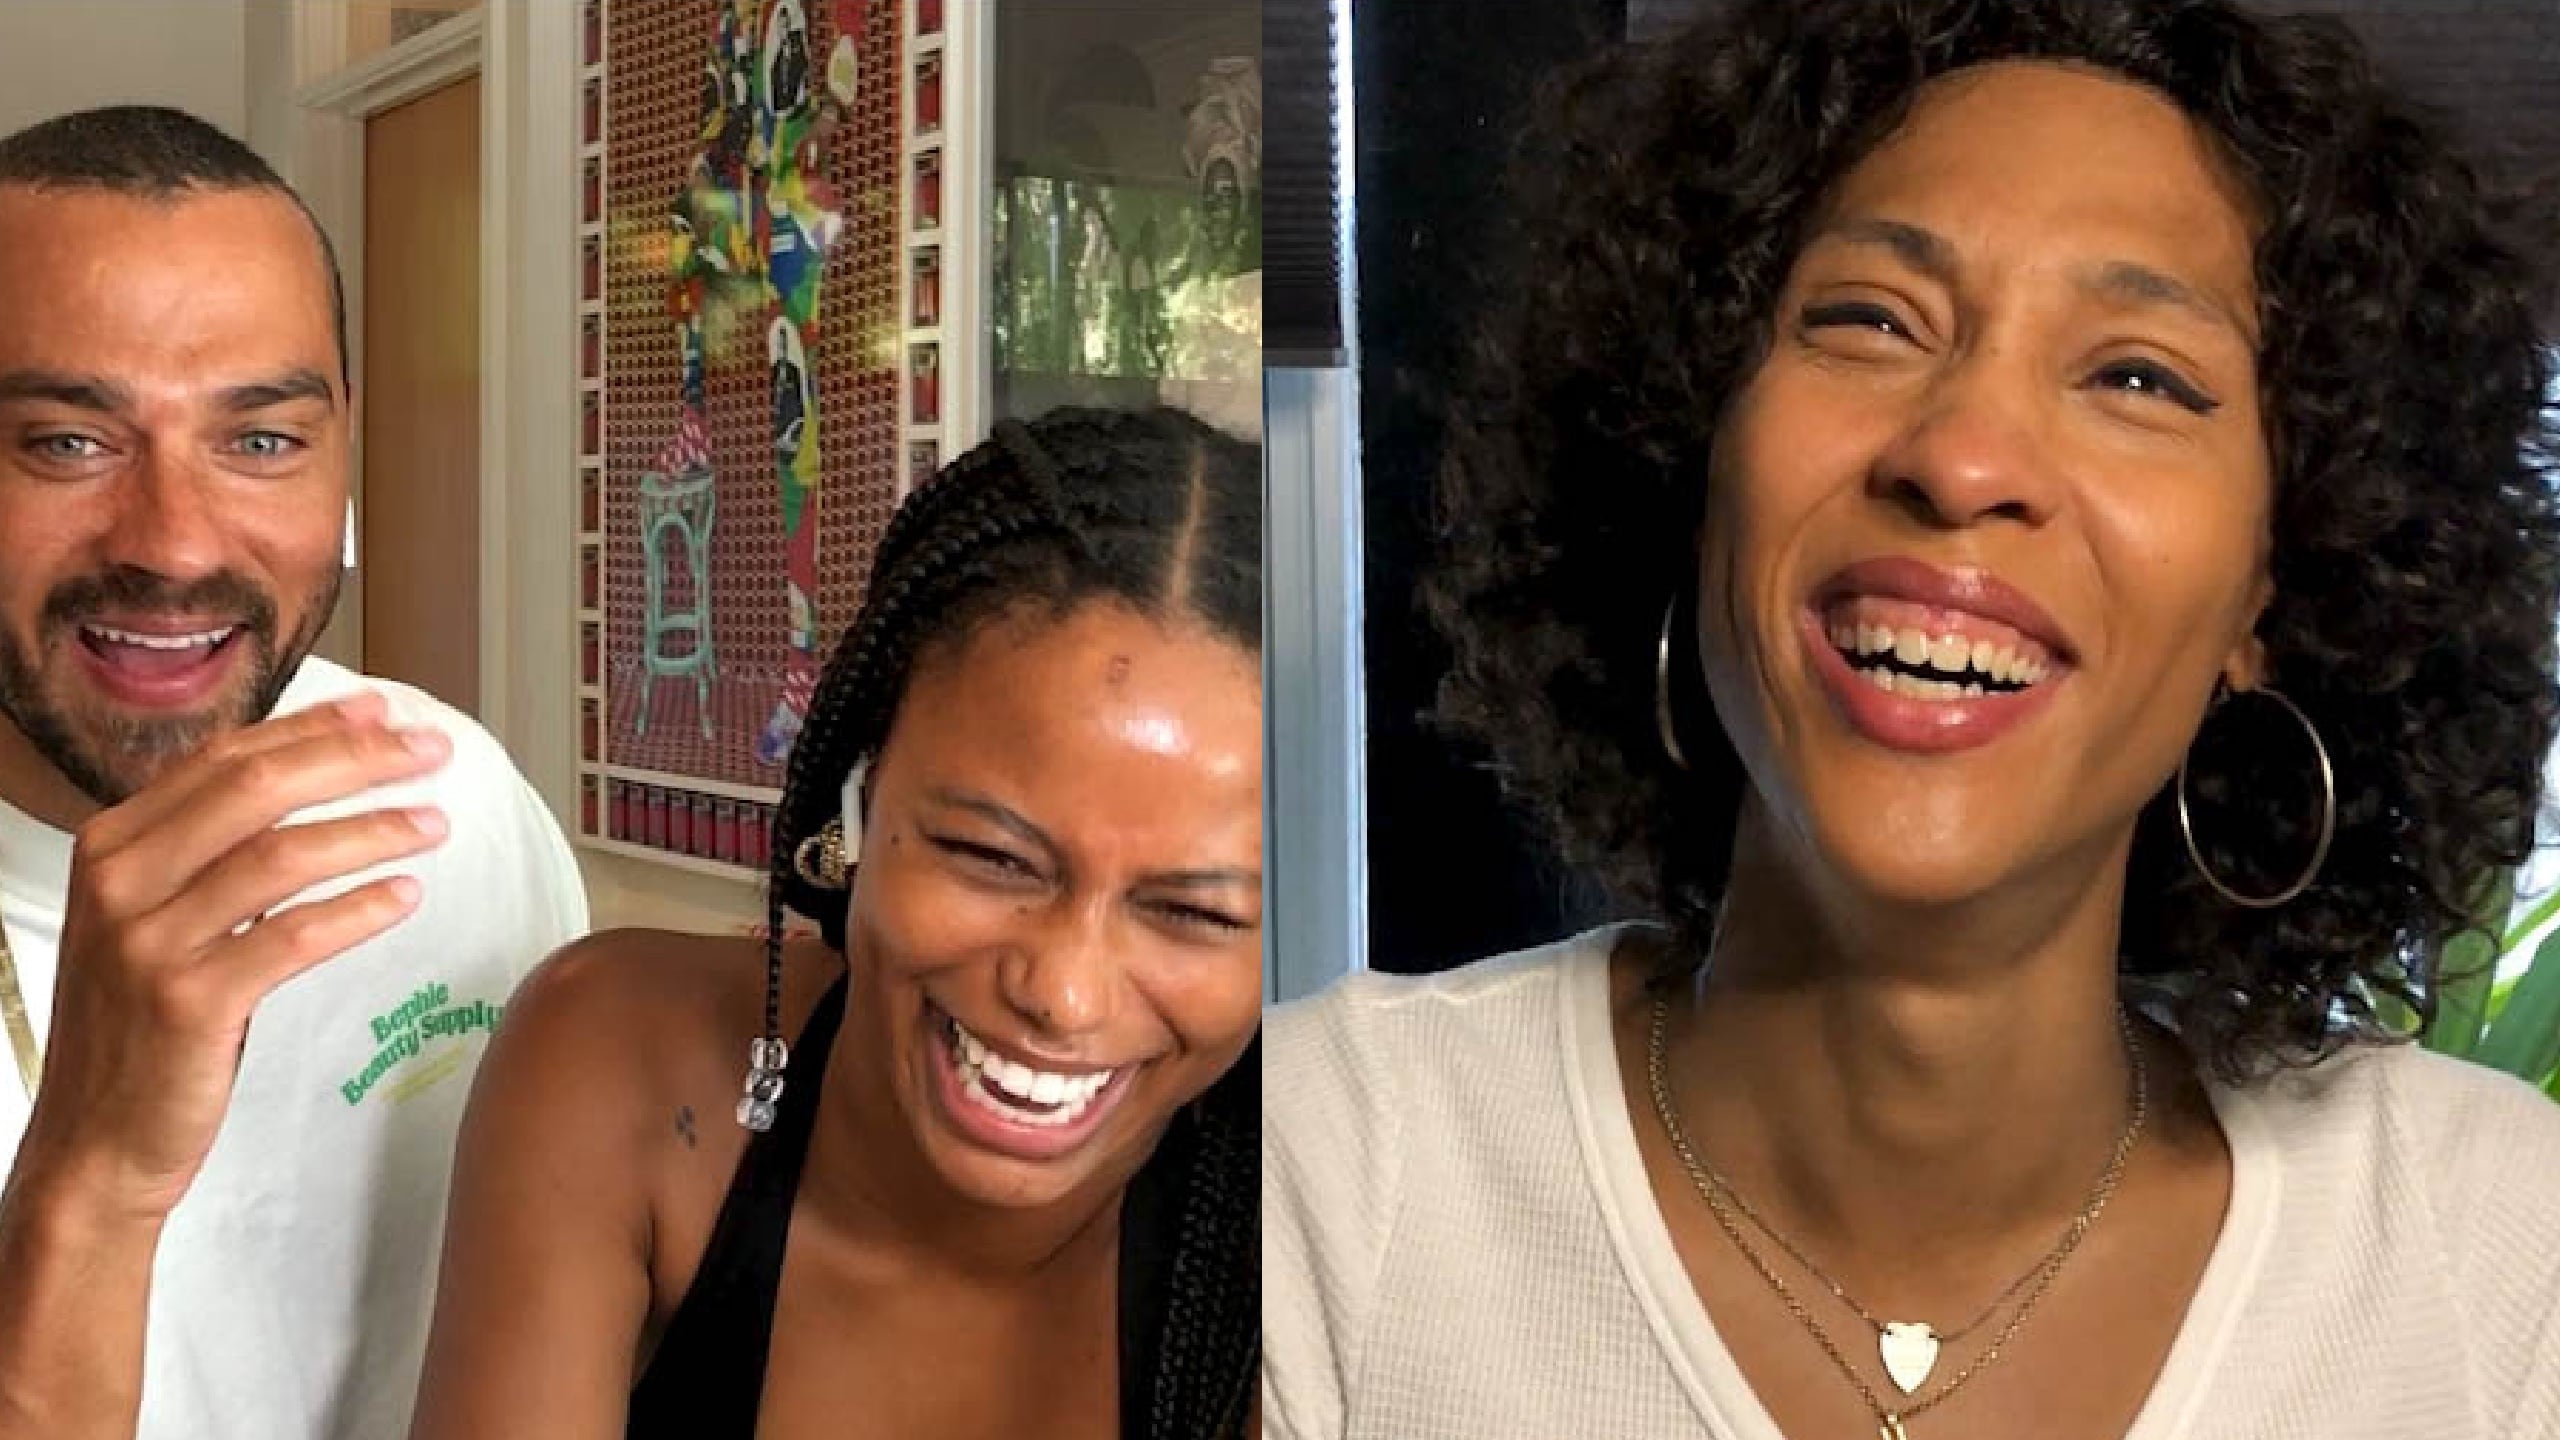 Bottomless Brunch at Colman's Season 2 Episode 1 - Jesse Williams, Taylour Paige, and Mj Rodriguez